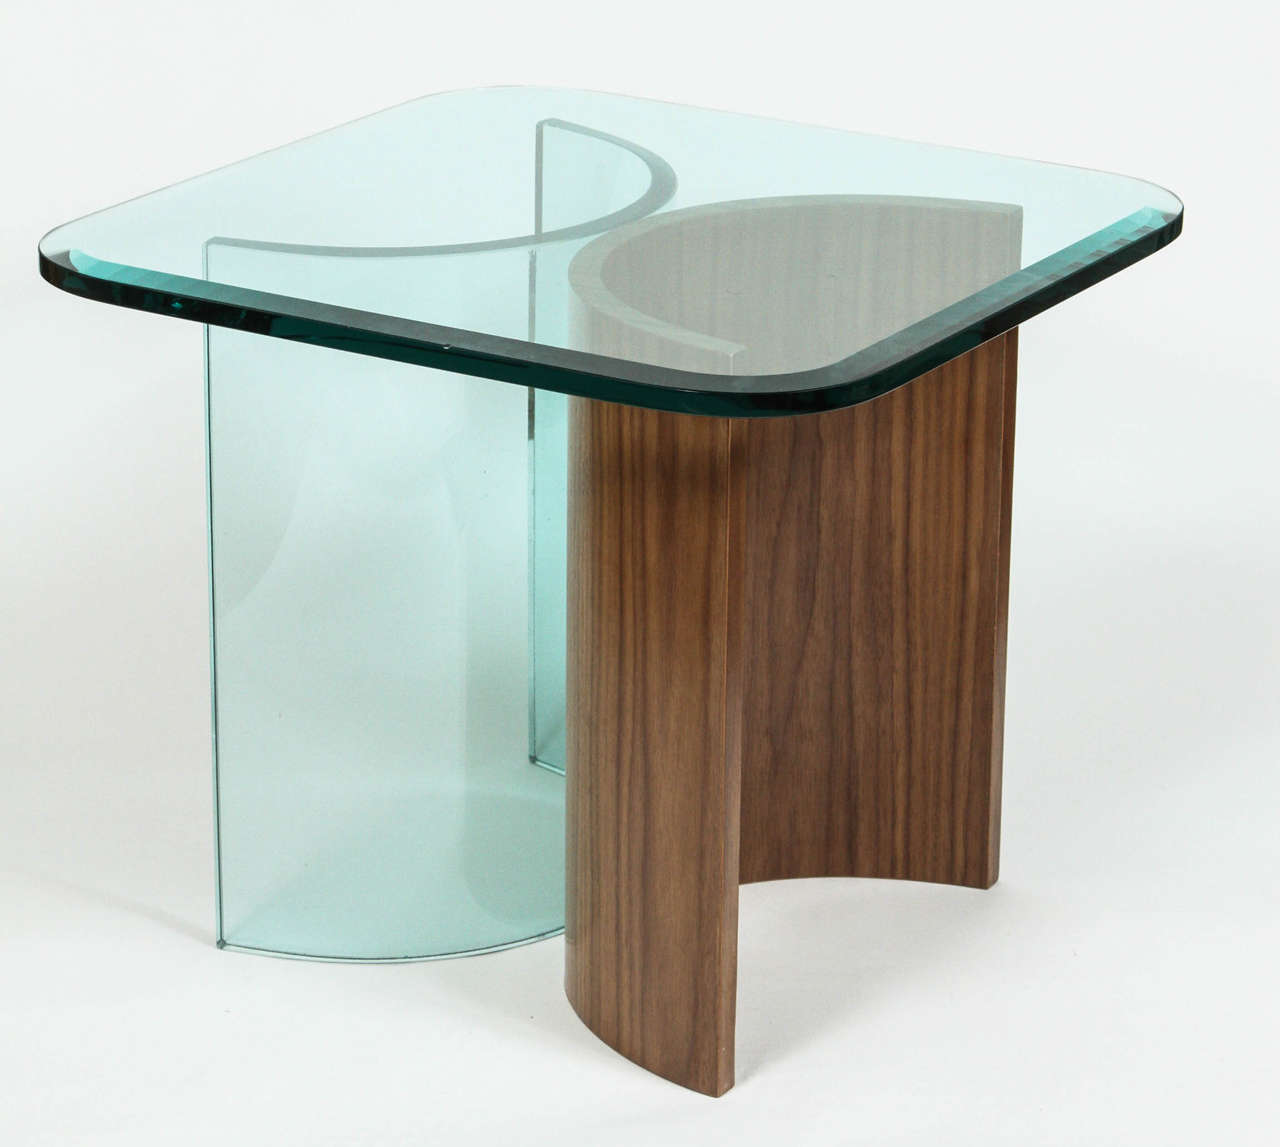 Pair of curved glass and walnut side tables.
Curved tempered glass Pace style side tables from the late 1970s with added walnut veneer leg (one on each table). Could be used as side tables or together as a coffee table.